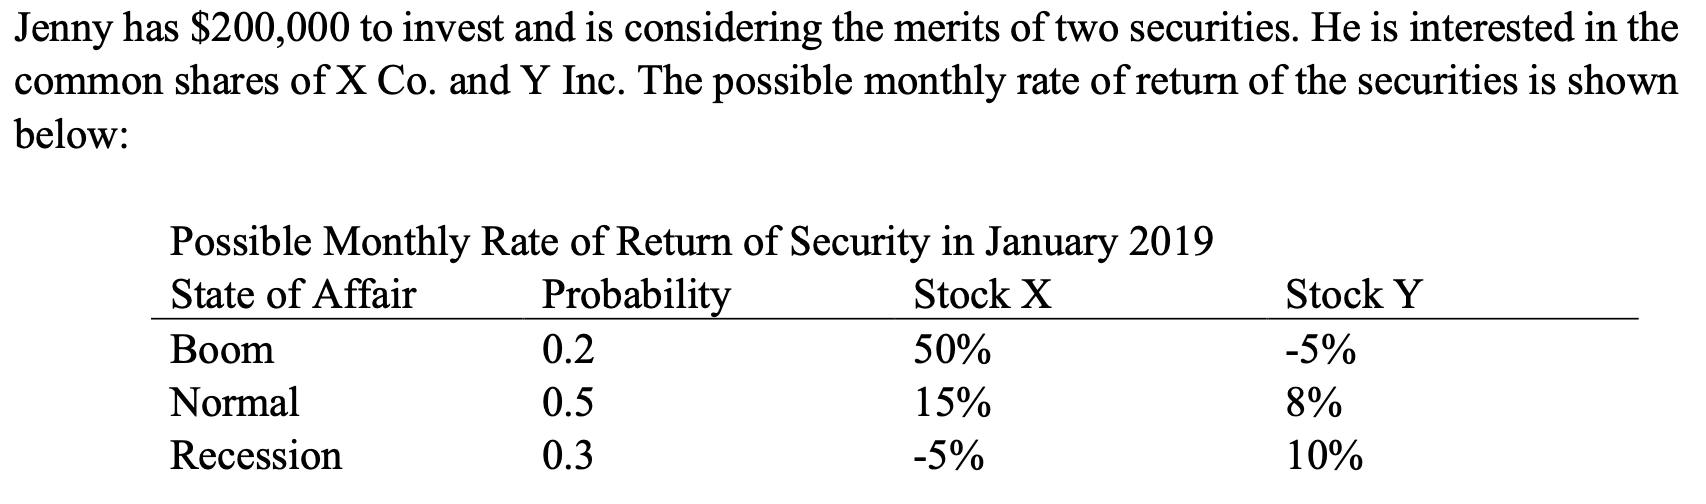 Jenny has $200,000 to invest and is considering the merits of two securities. He is interested in the
common shares of X Co. and Y Inc. The possible monthly rate of return of the securities is shown
below:
Possible Monthly Rate of Return of Security in January 2019
Probability
State of Affair
Stock X
Stock Y
Boom
0.2
50%
-5%
Normal
0.5
15%
8%
Recession
0.3
-5%
10%
